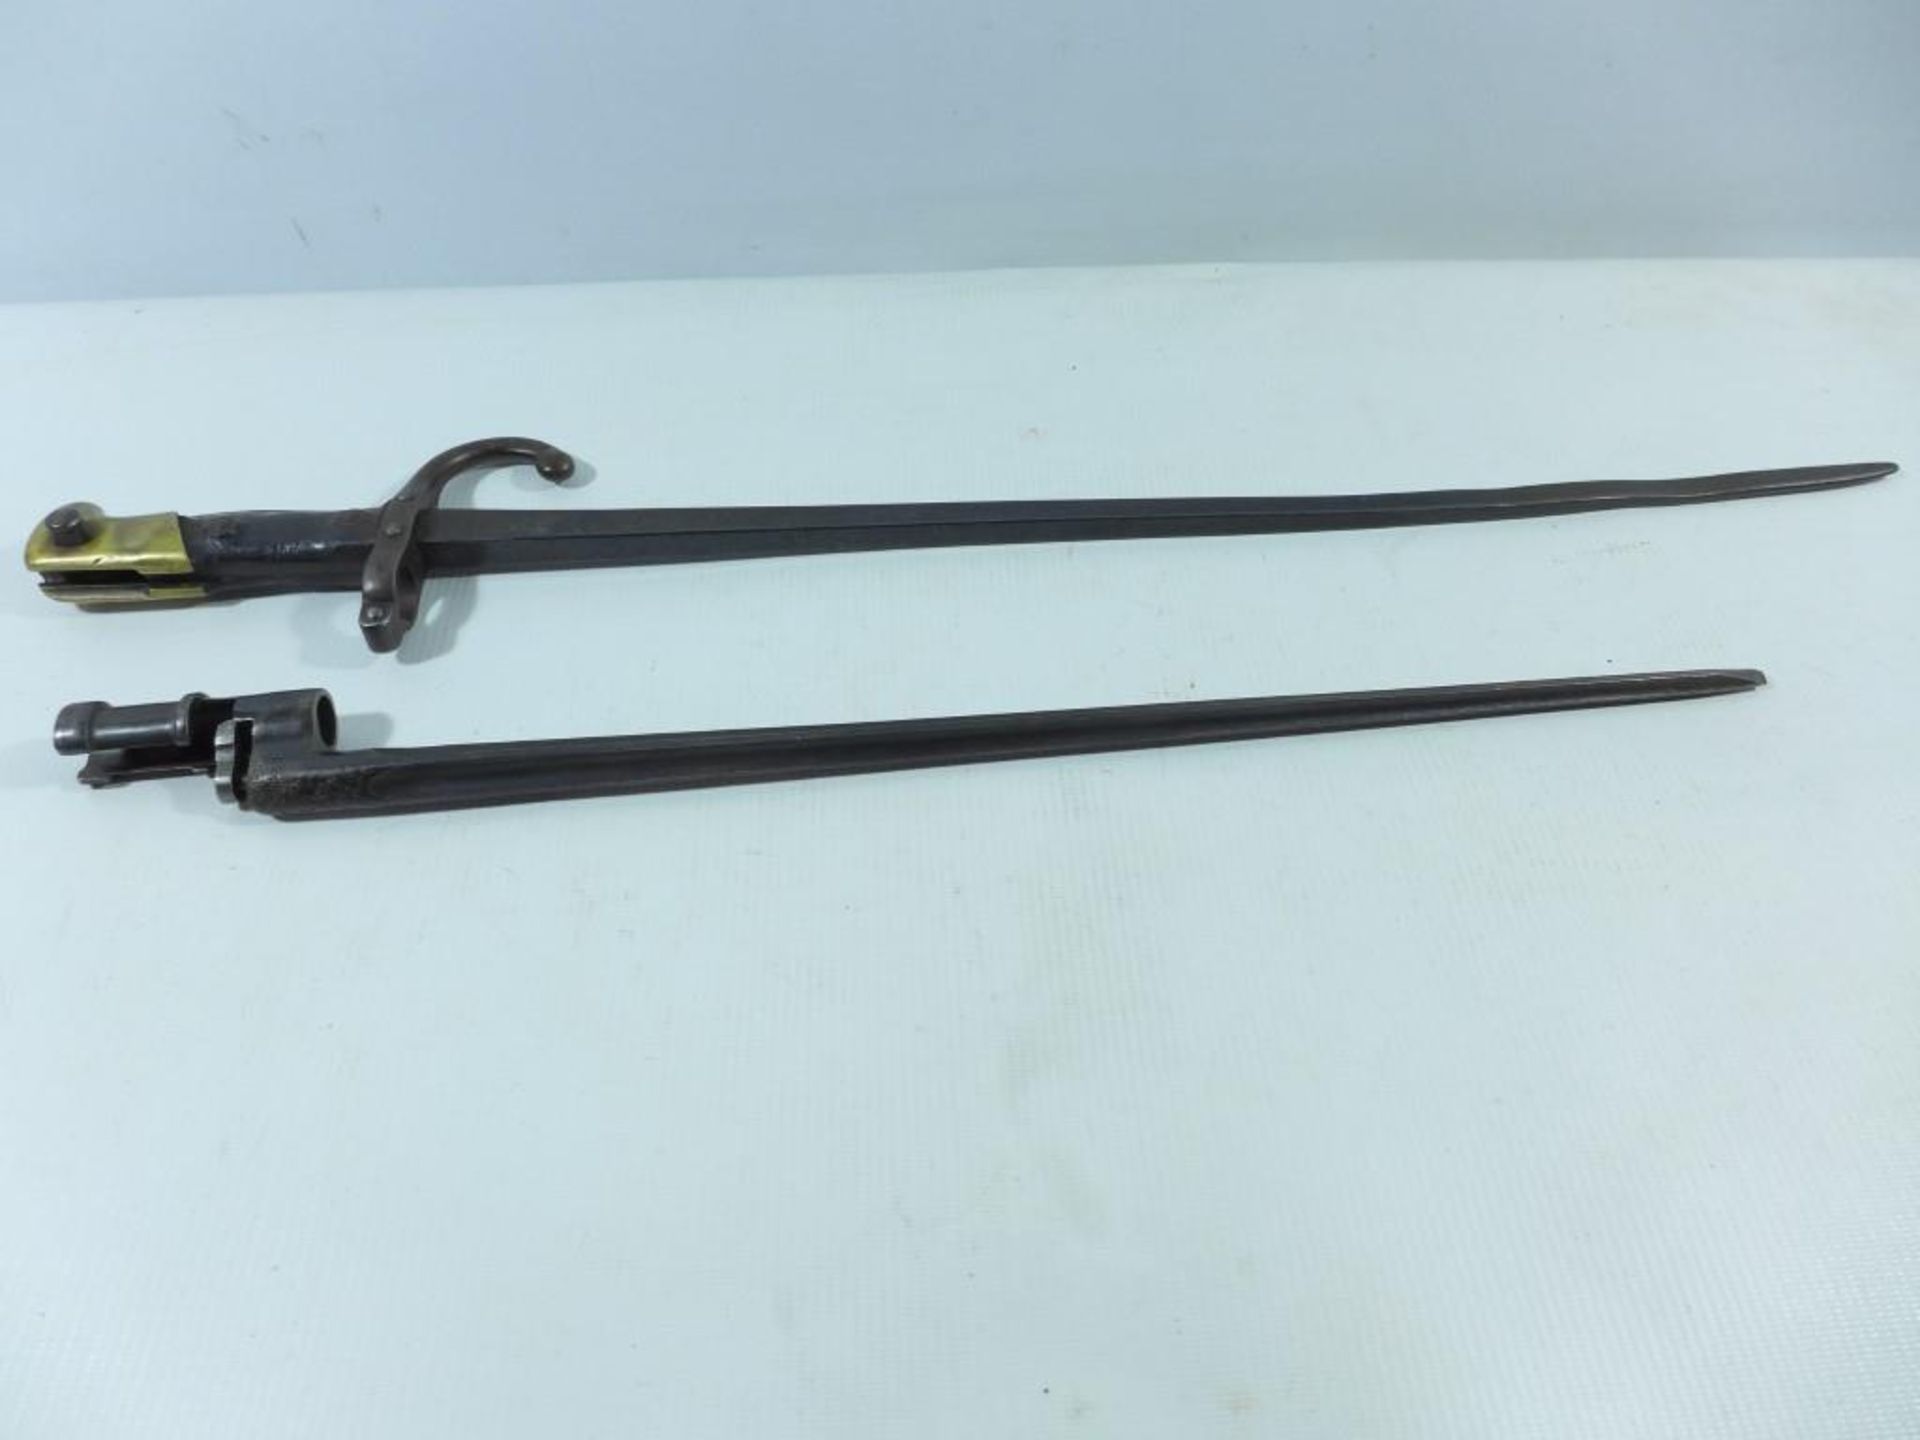 A FRENCH GRAS BAYONET DATED 1876, 51CM BLADE, AND A SOCKET BAYONET, LENGTH 50CM (2) - Image 2 of 4